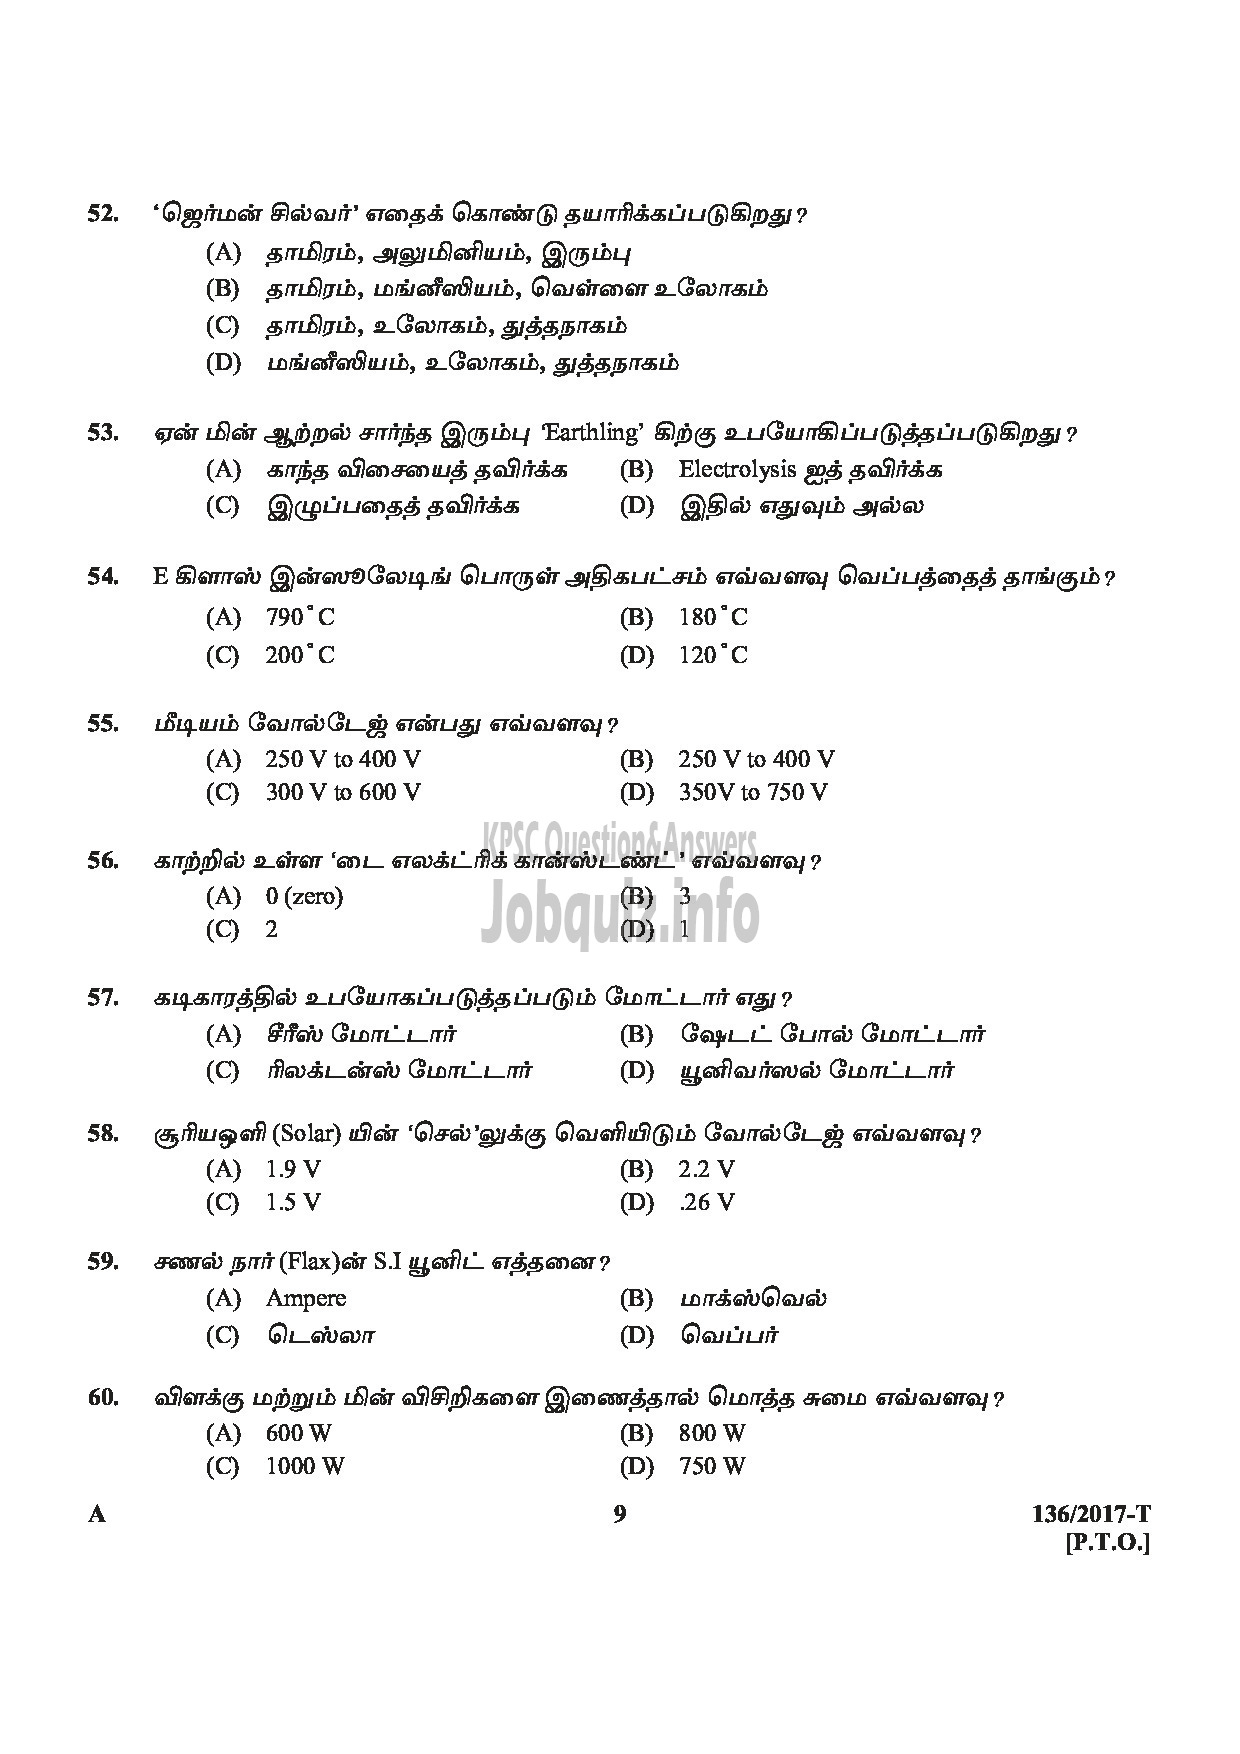 Kerala PSC Question Paper - METER READER/SPOT BILLER SPECIAL RECRUITMENT FROM AMONG ST ONLY MEDIUM OF QUESTION TAMIL-9